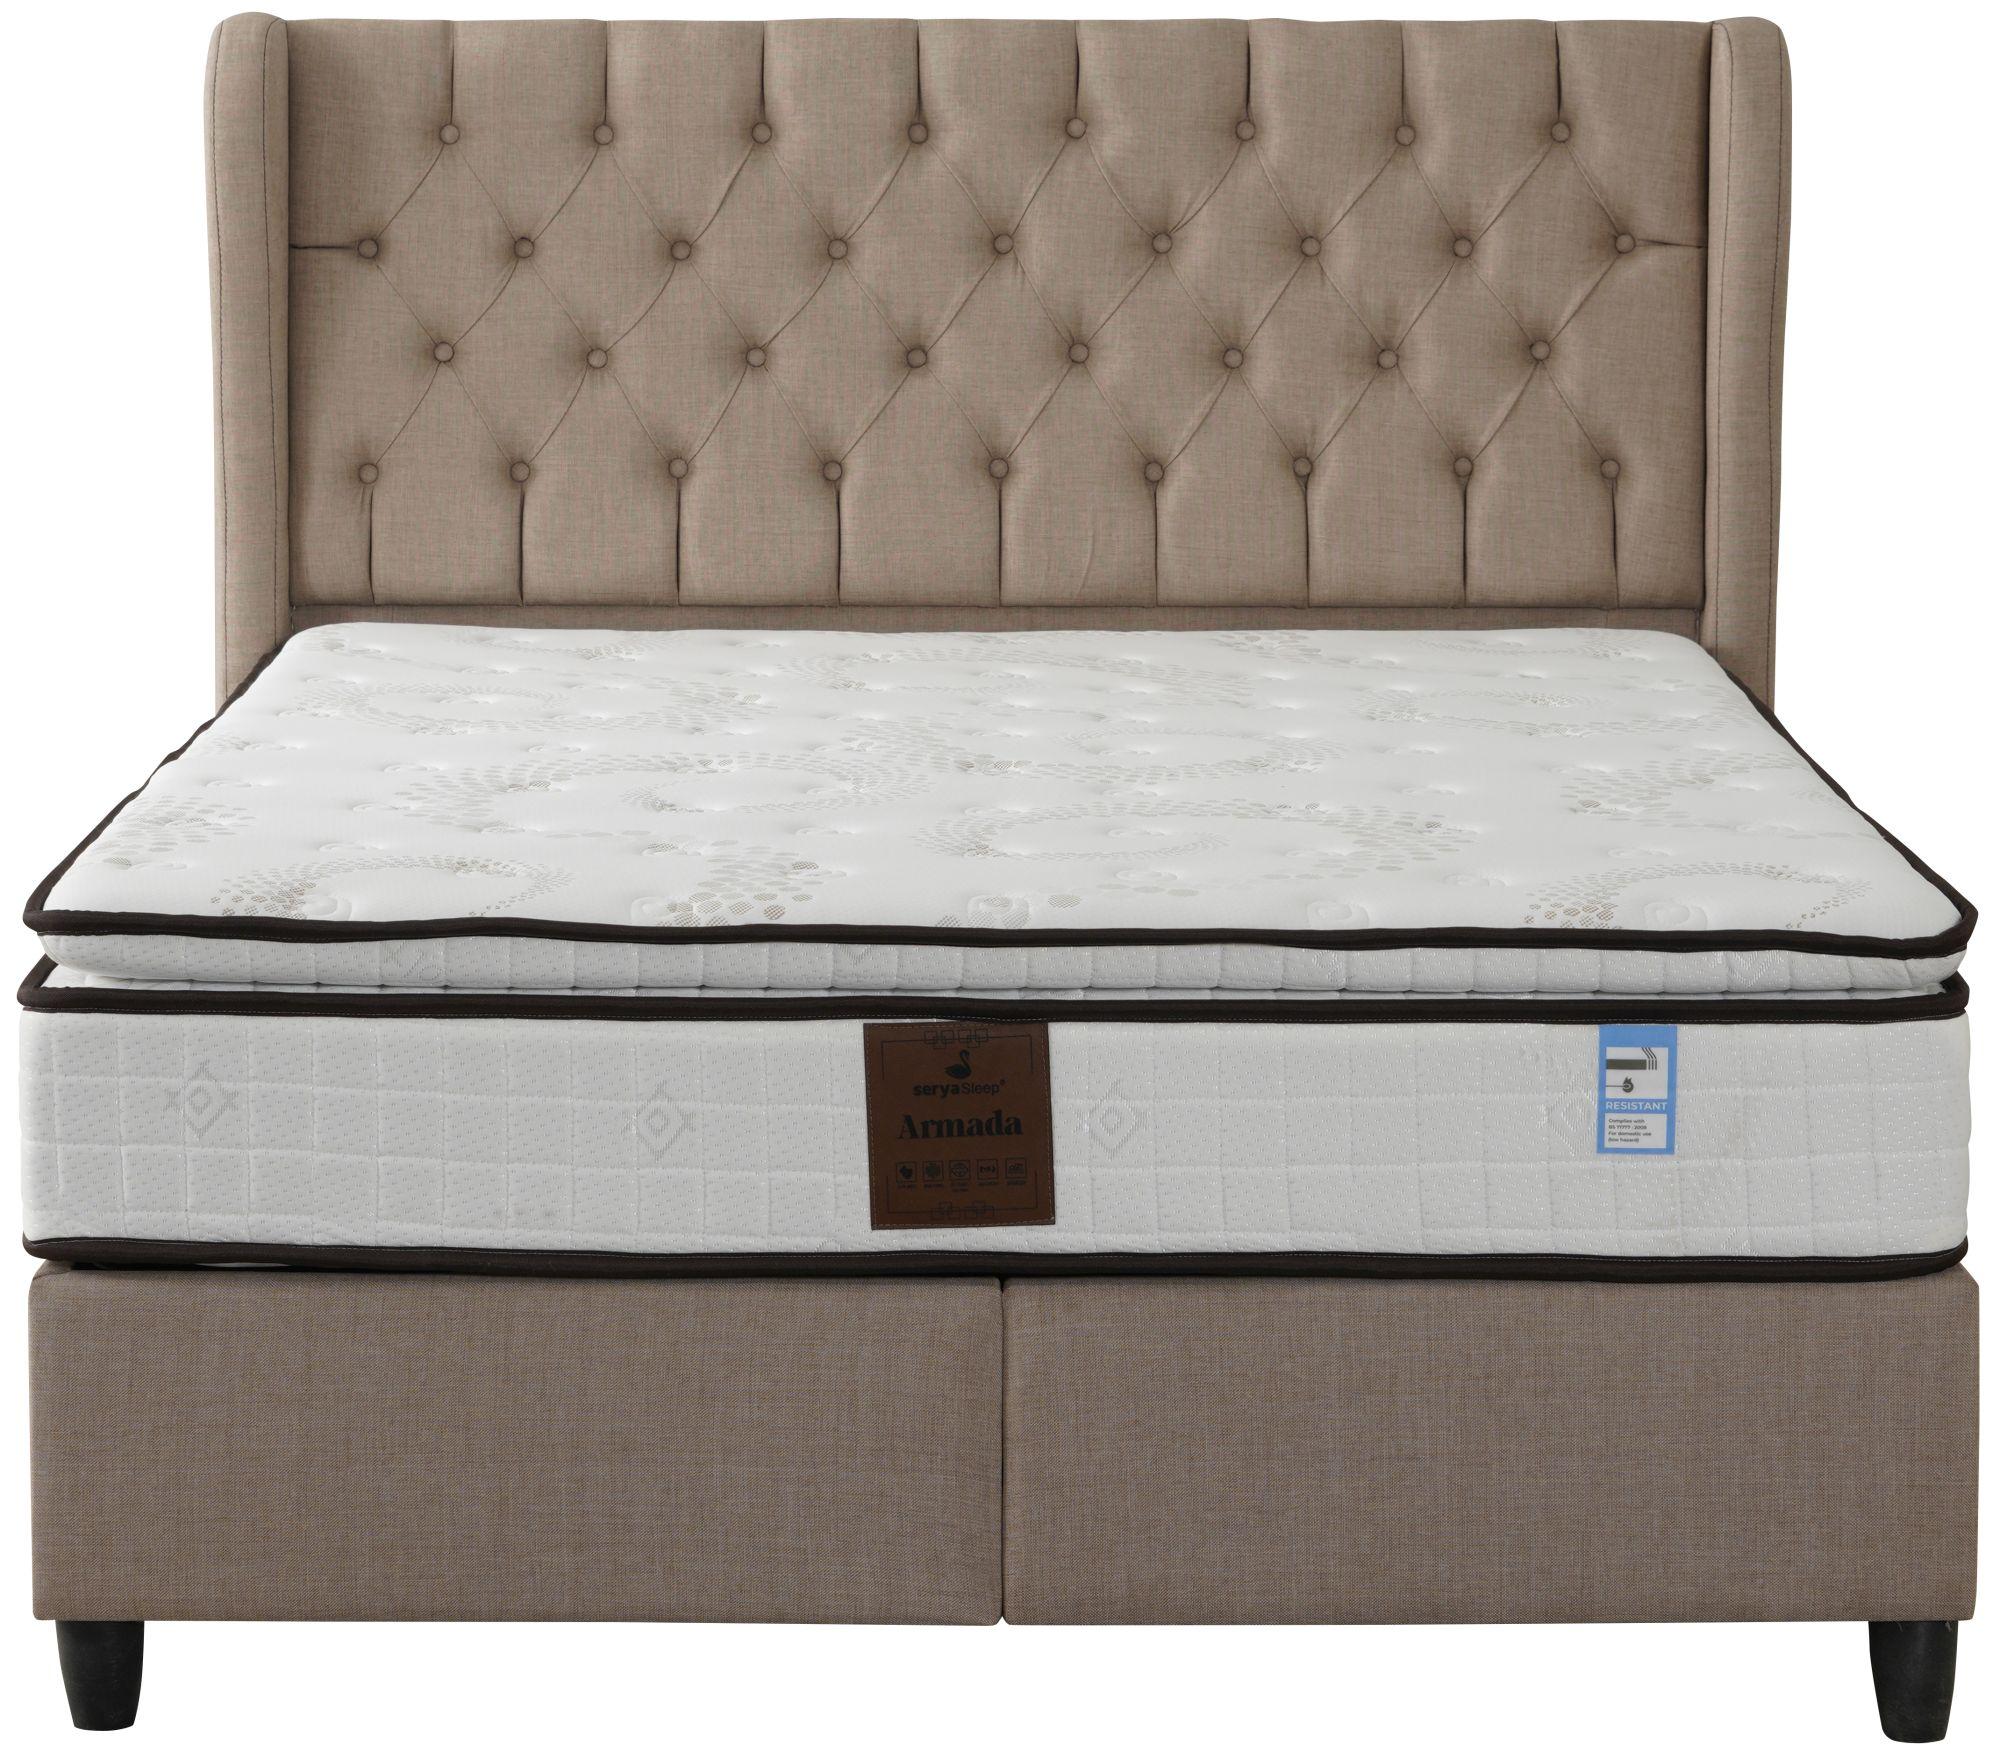 Sana Beige Fabric Upholstered Ottoman Storage Bed - Comes in Double and King Size